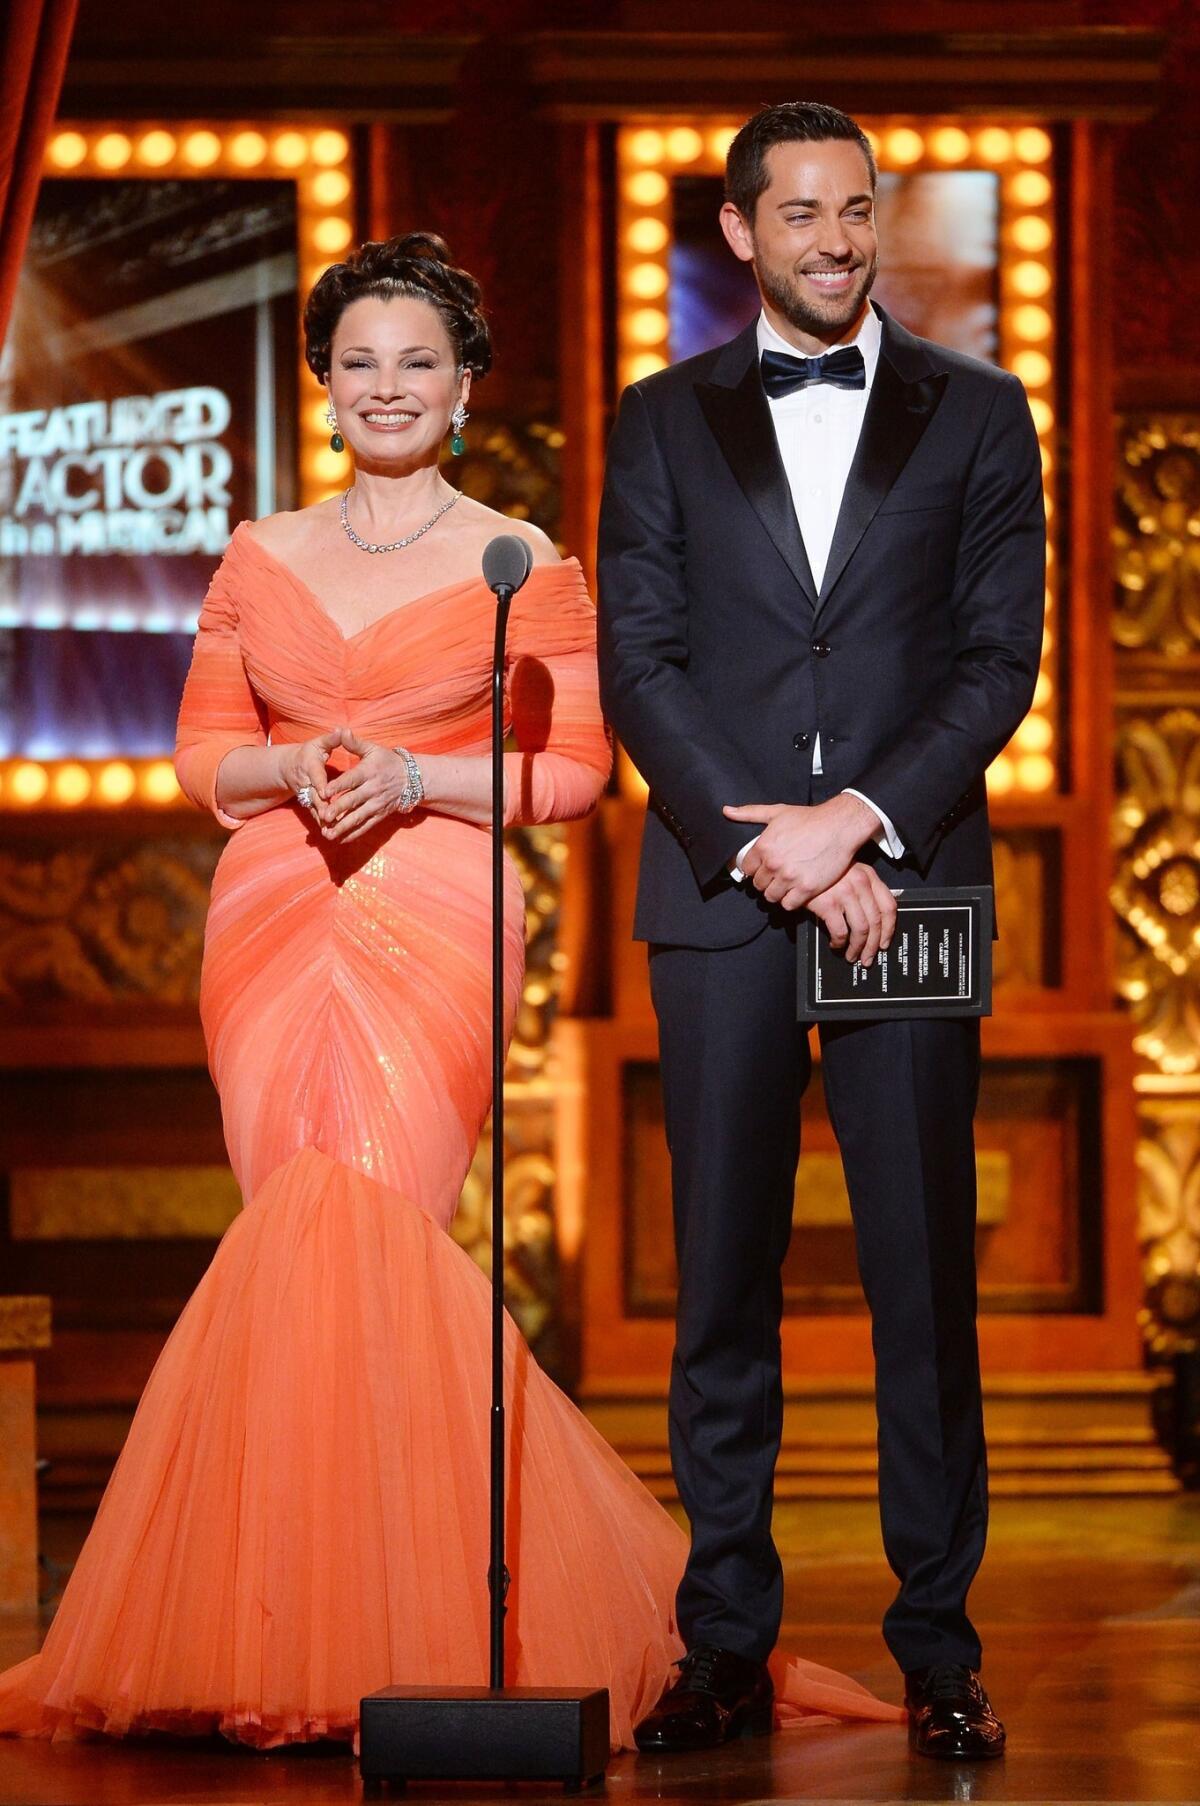 Fran Drescher and Zachary Levi onstage during the 2014 Tony Awards.